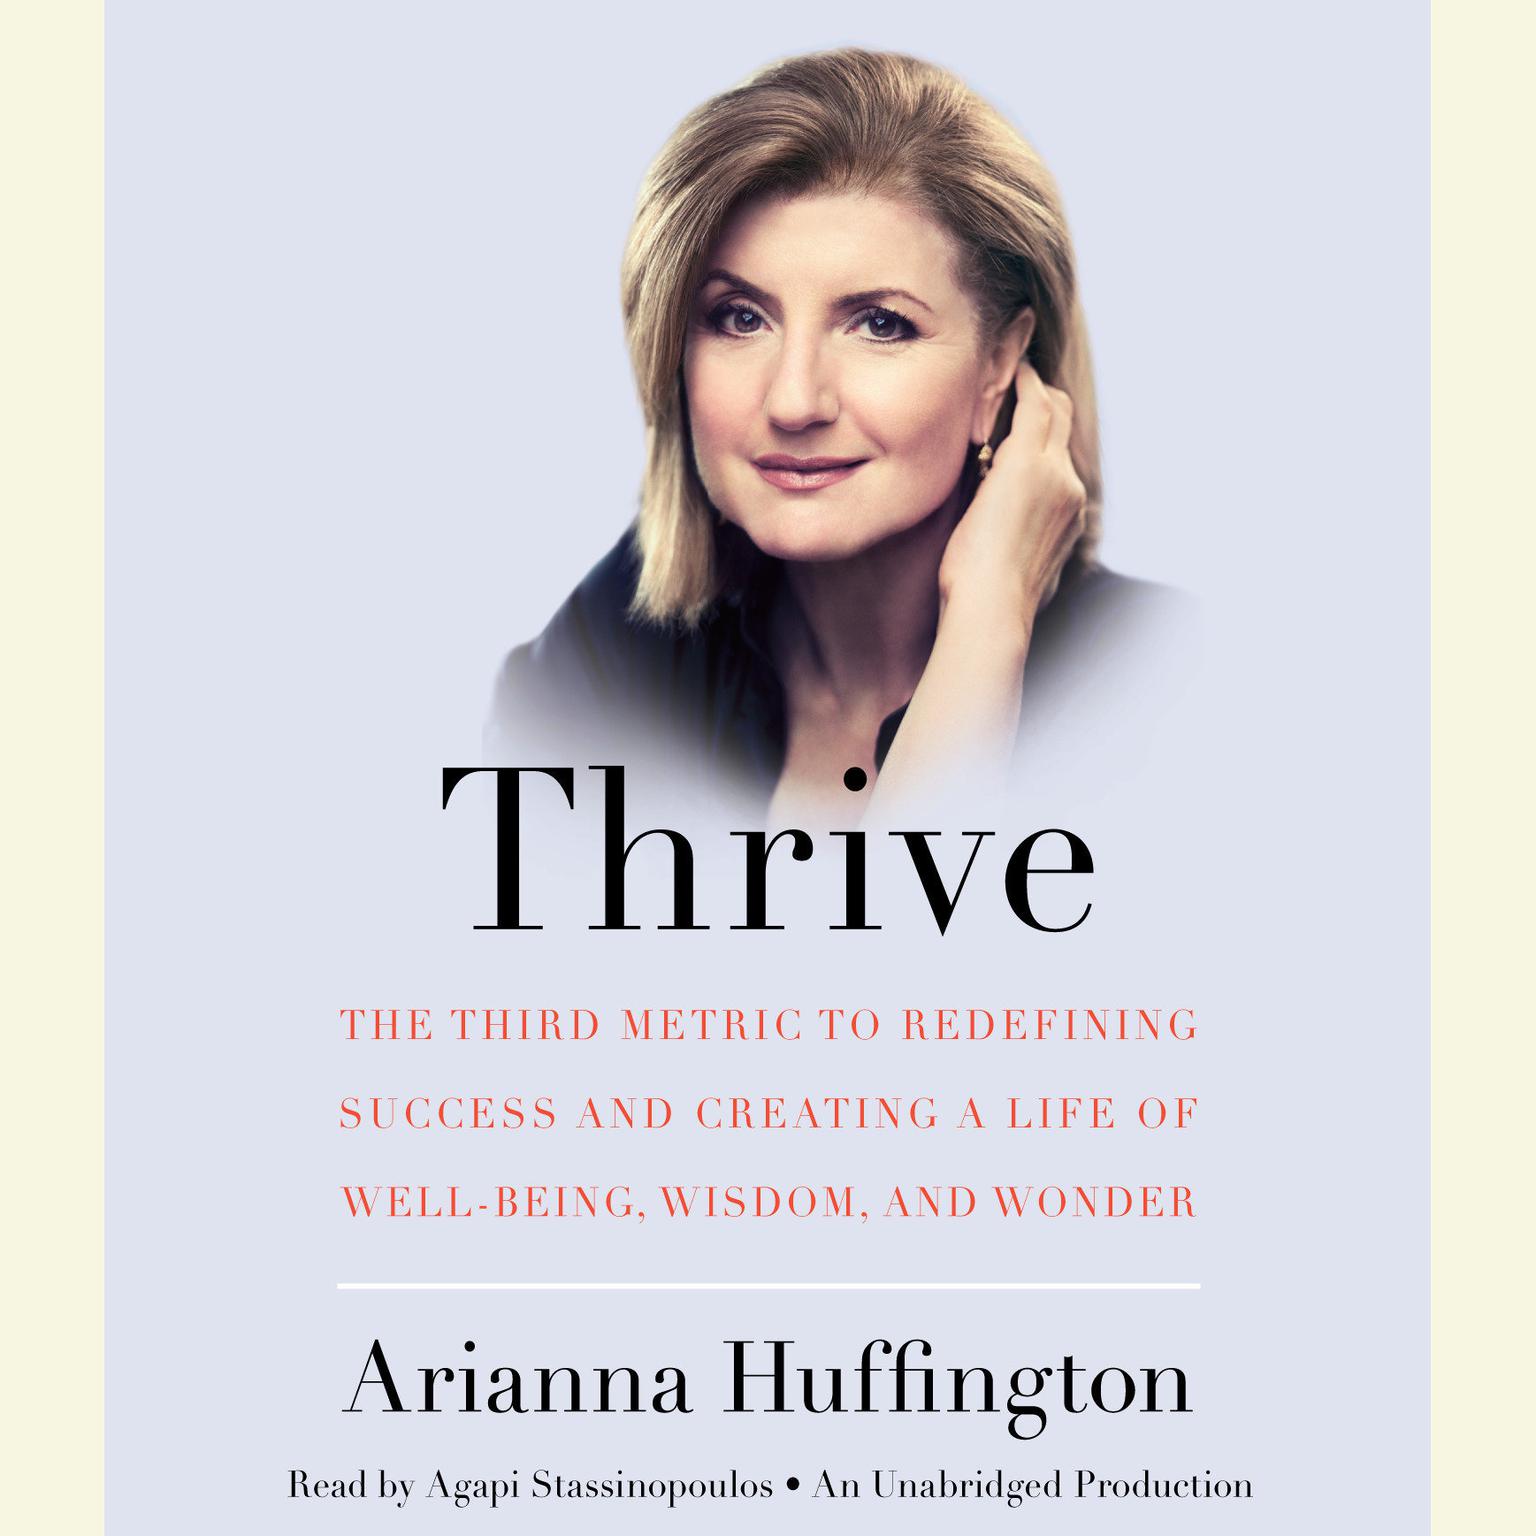 Thrive: The Third Metric to Redefining Success and Creating a Life of Well-Being, Wisdom, and Wonder Audiobook, by Arianna Huffington